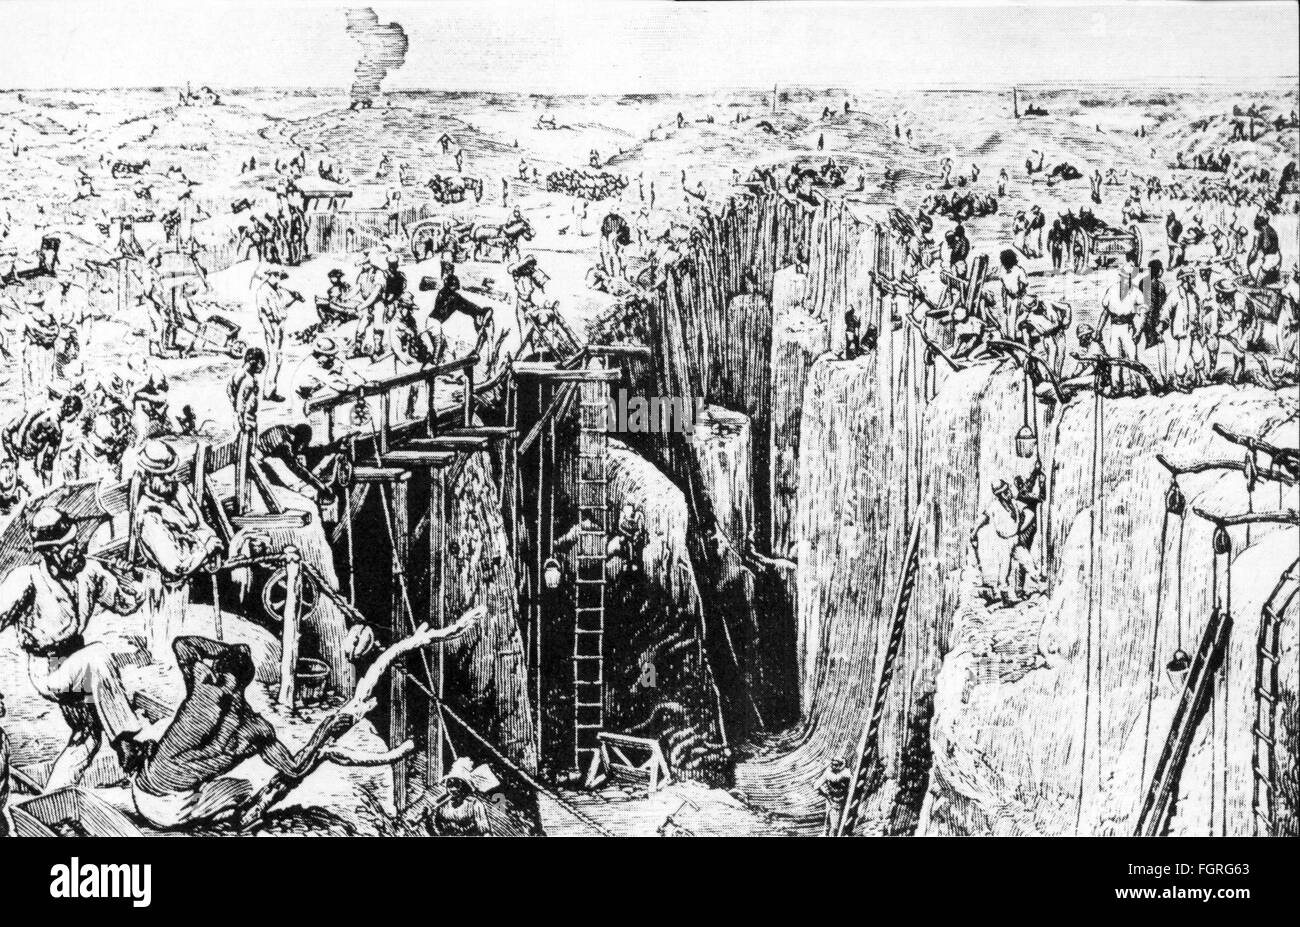 mining, diamonds, exploitation of diamonds at the 'Big Hole', Kimberley, wood engraving, 19th century, Additional-Rights-Clearences-Not Available Stock Photo